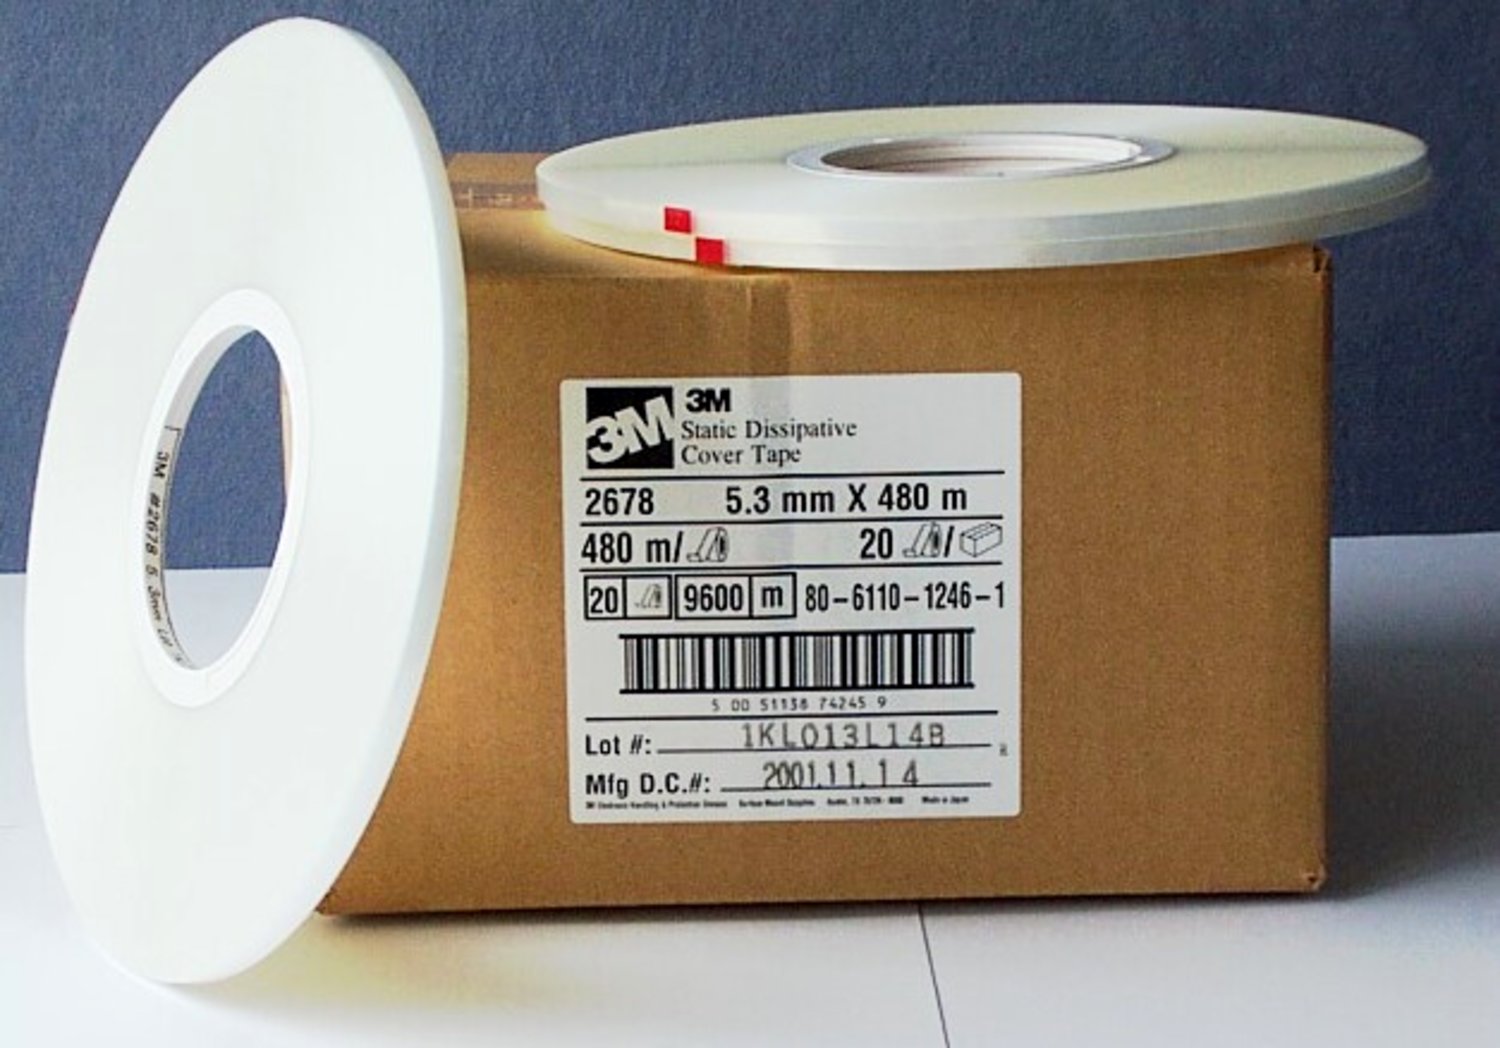 7100253951 - 3M Static Dissipative Heat Activated Cover Tape 2678, SG2540COMTAPE2678, 5.4 mm x 480 m, 80 Rolls/Case